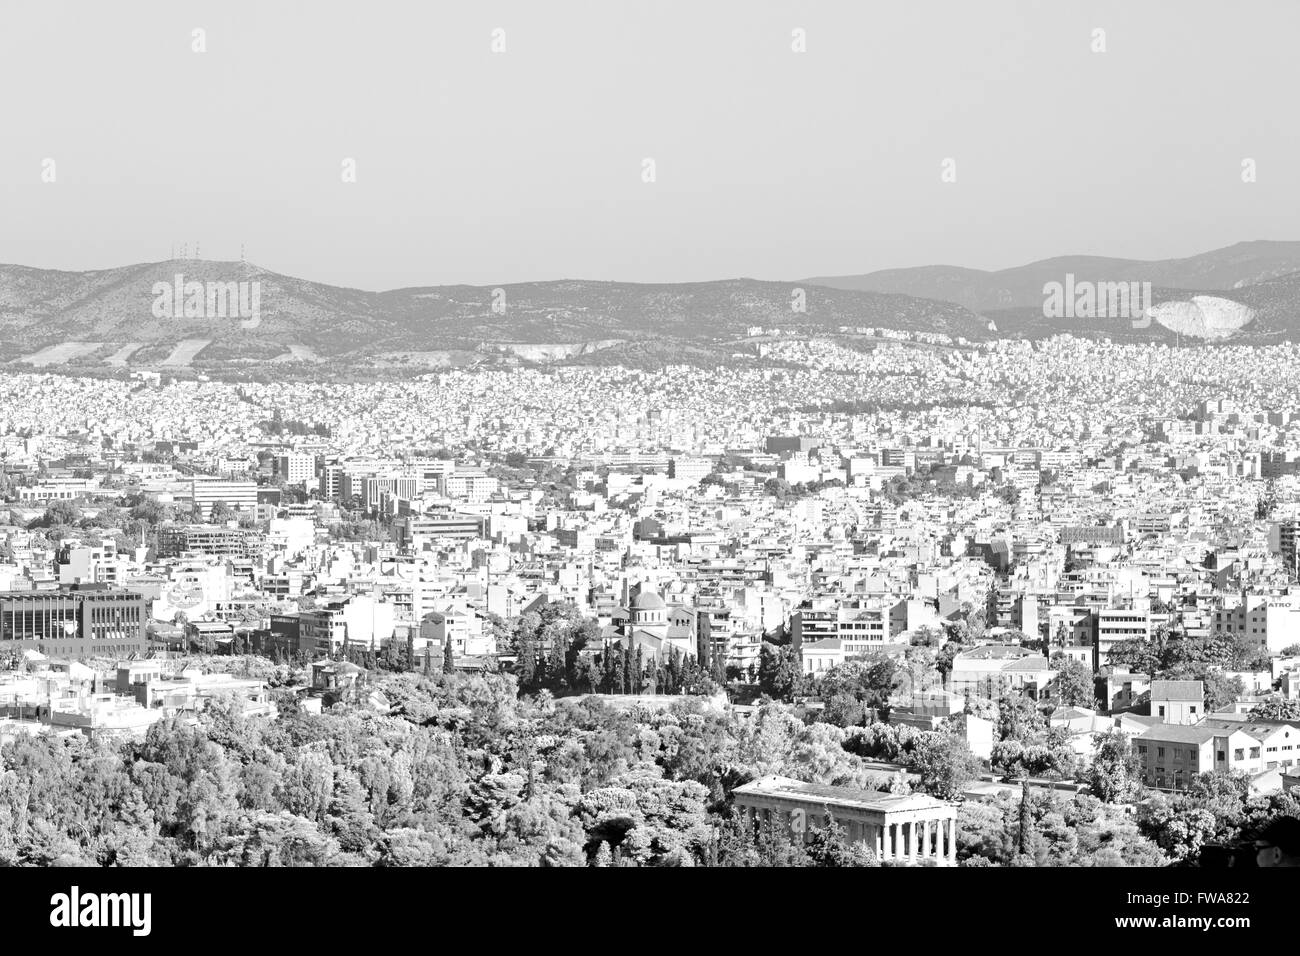 in the old europe greece and congestion of  houses new architecture Stock Photo